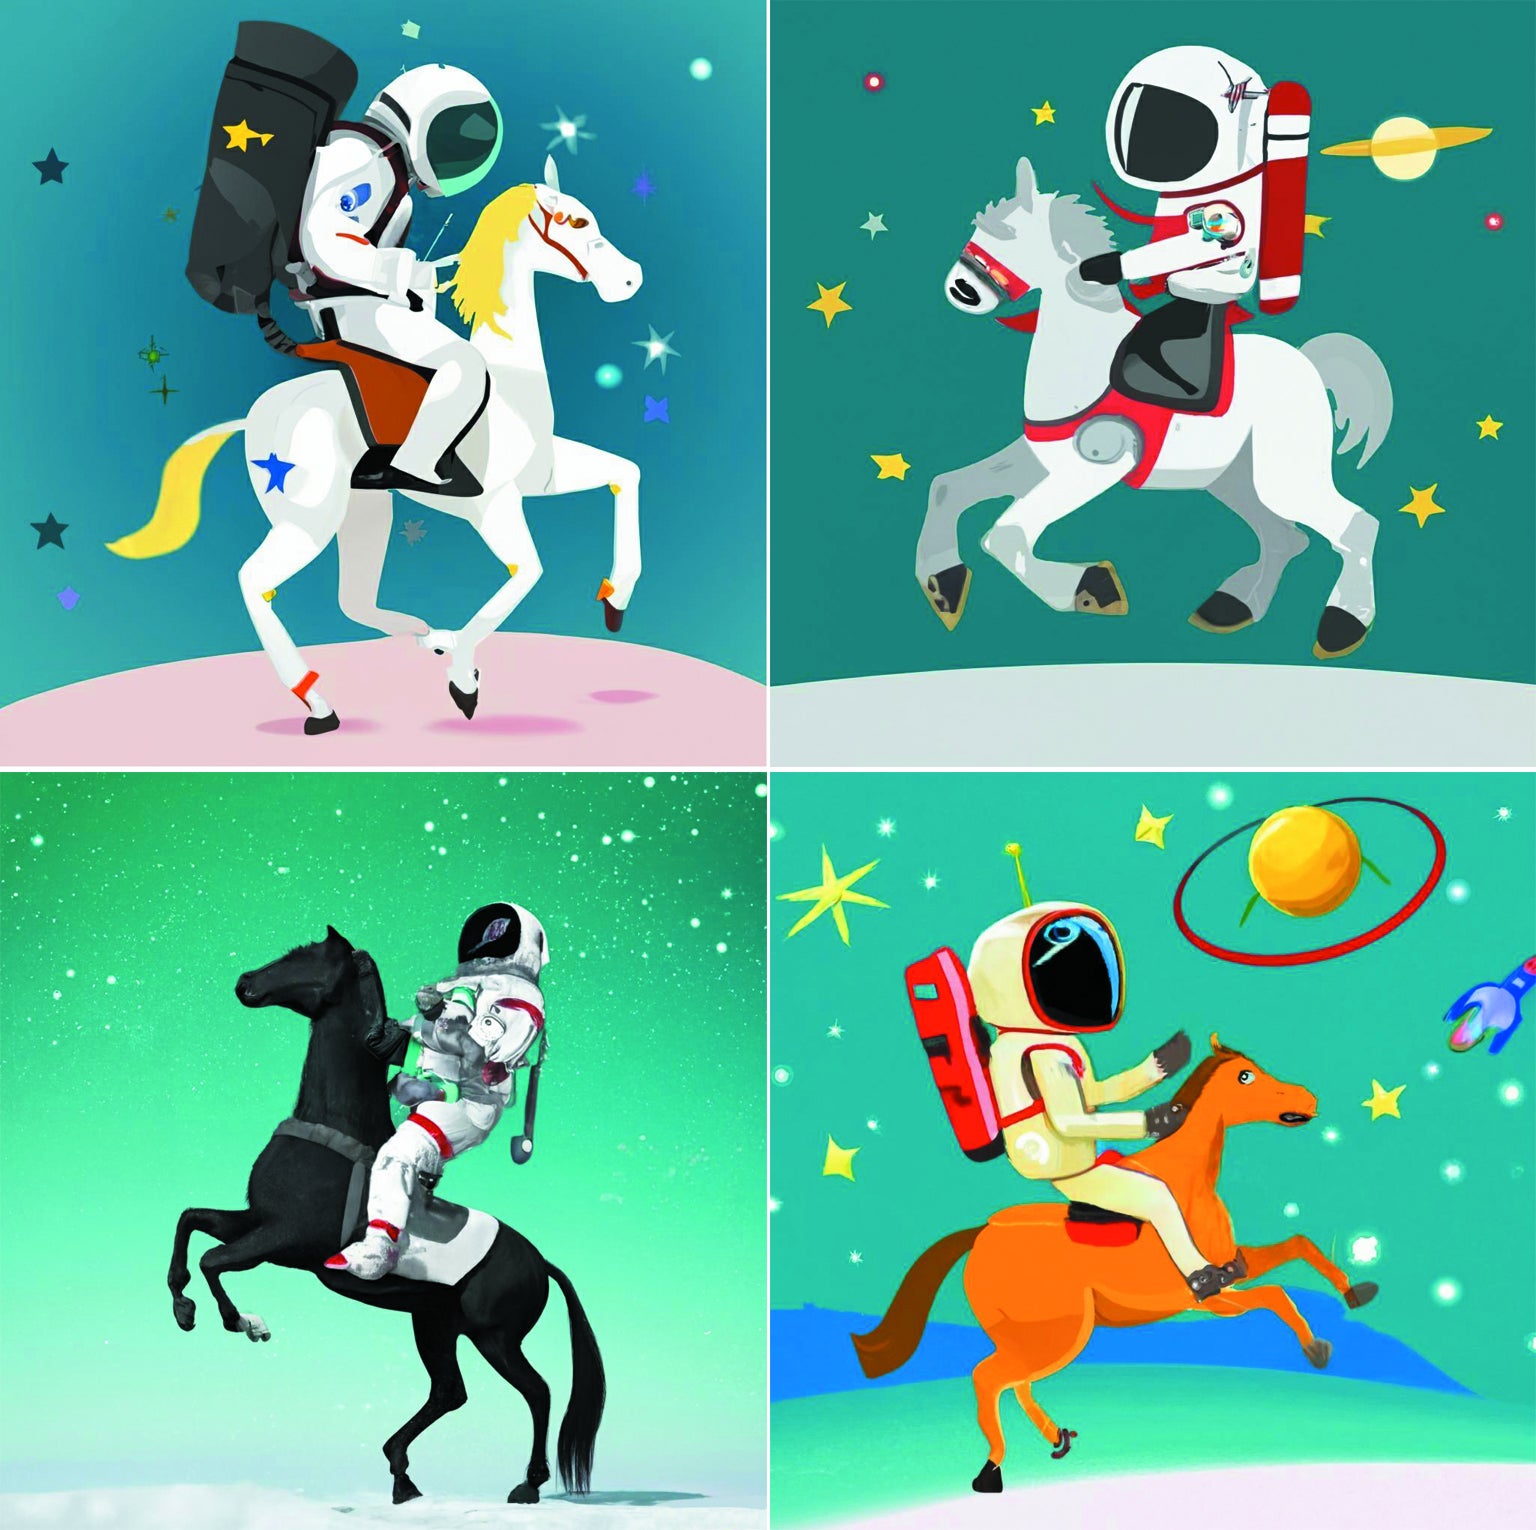 Four panel illustrations of an astronaut riding a horse